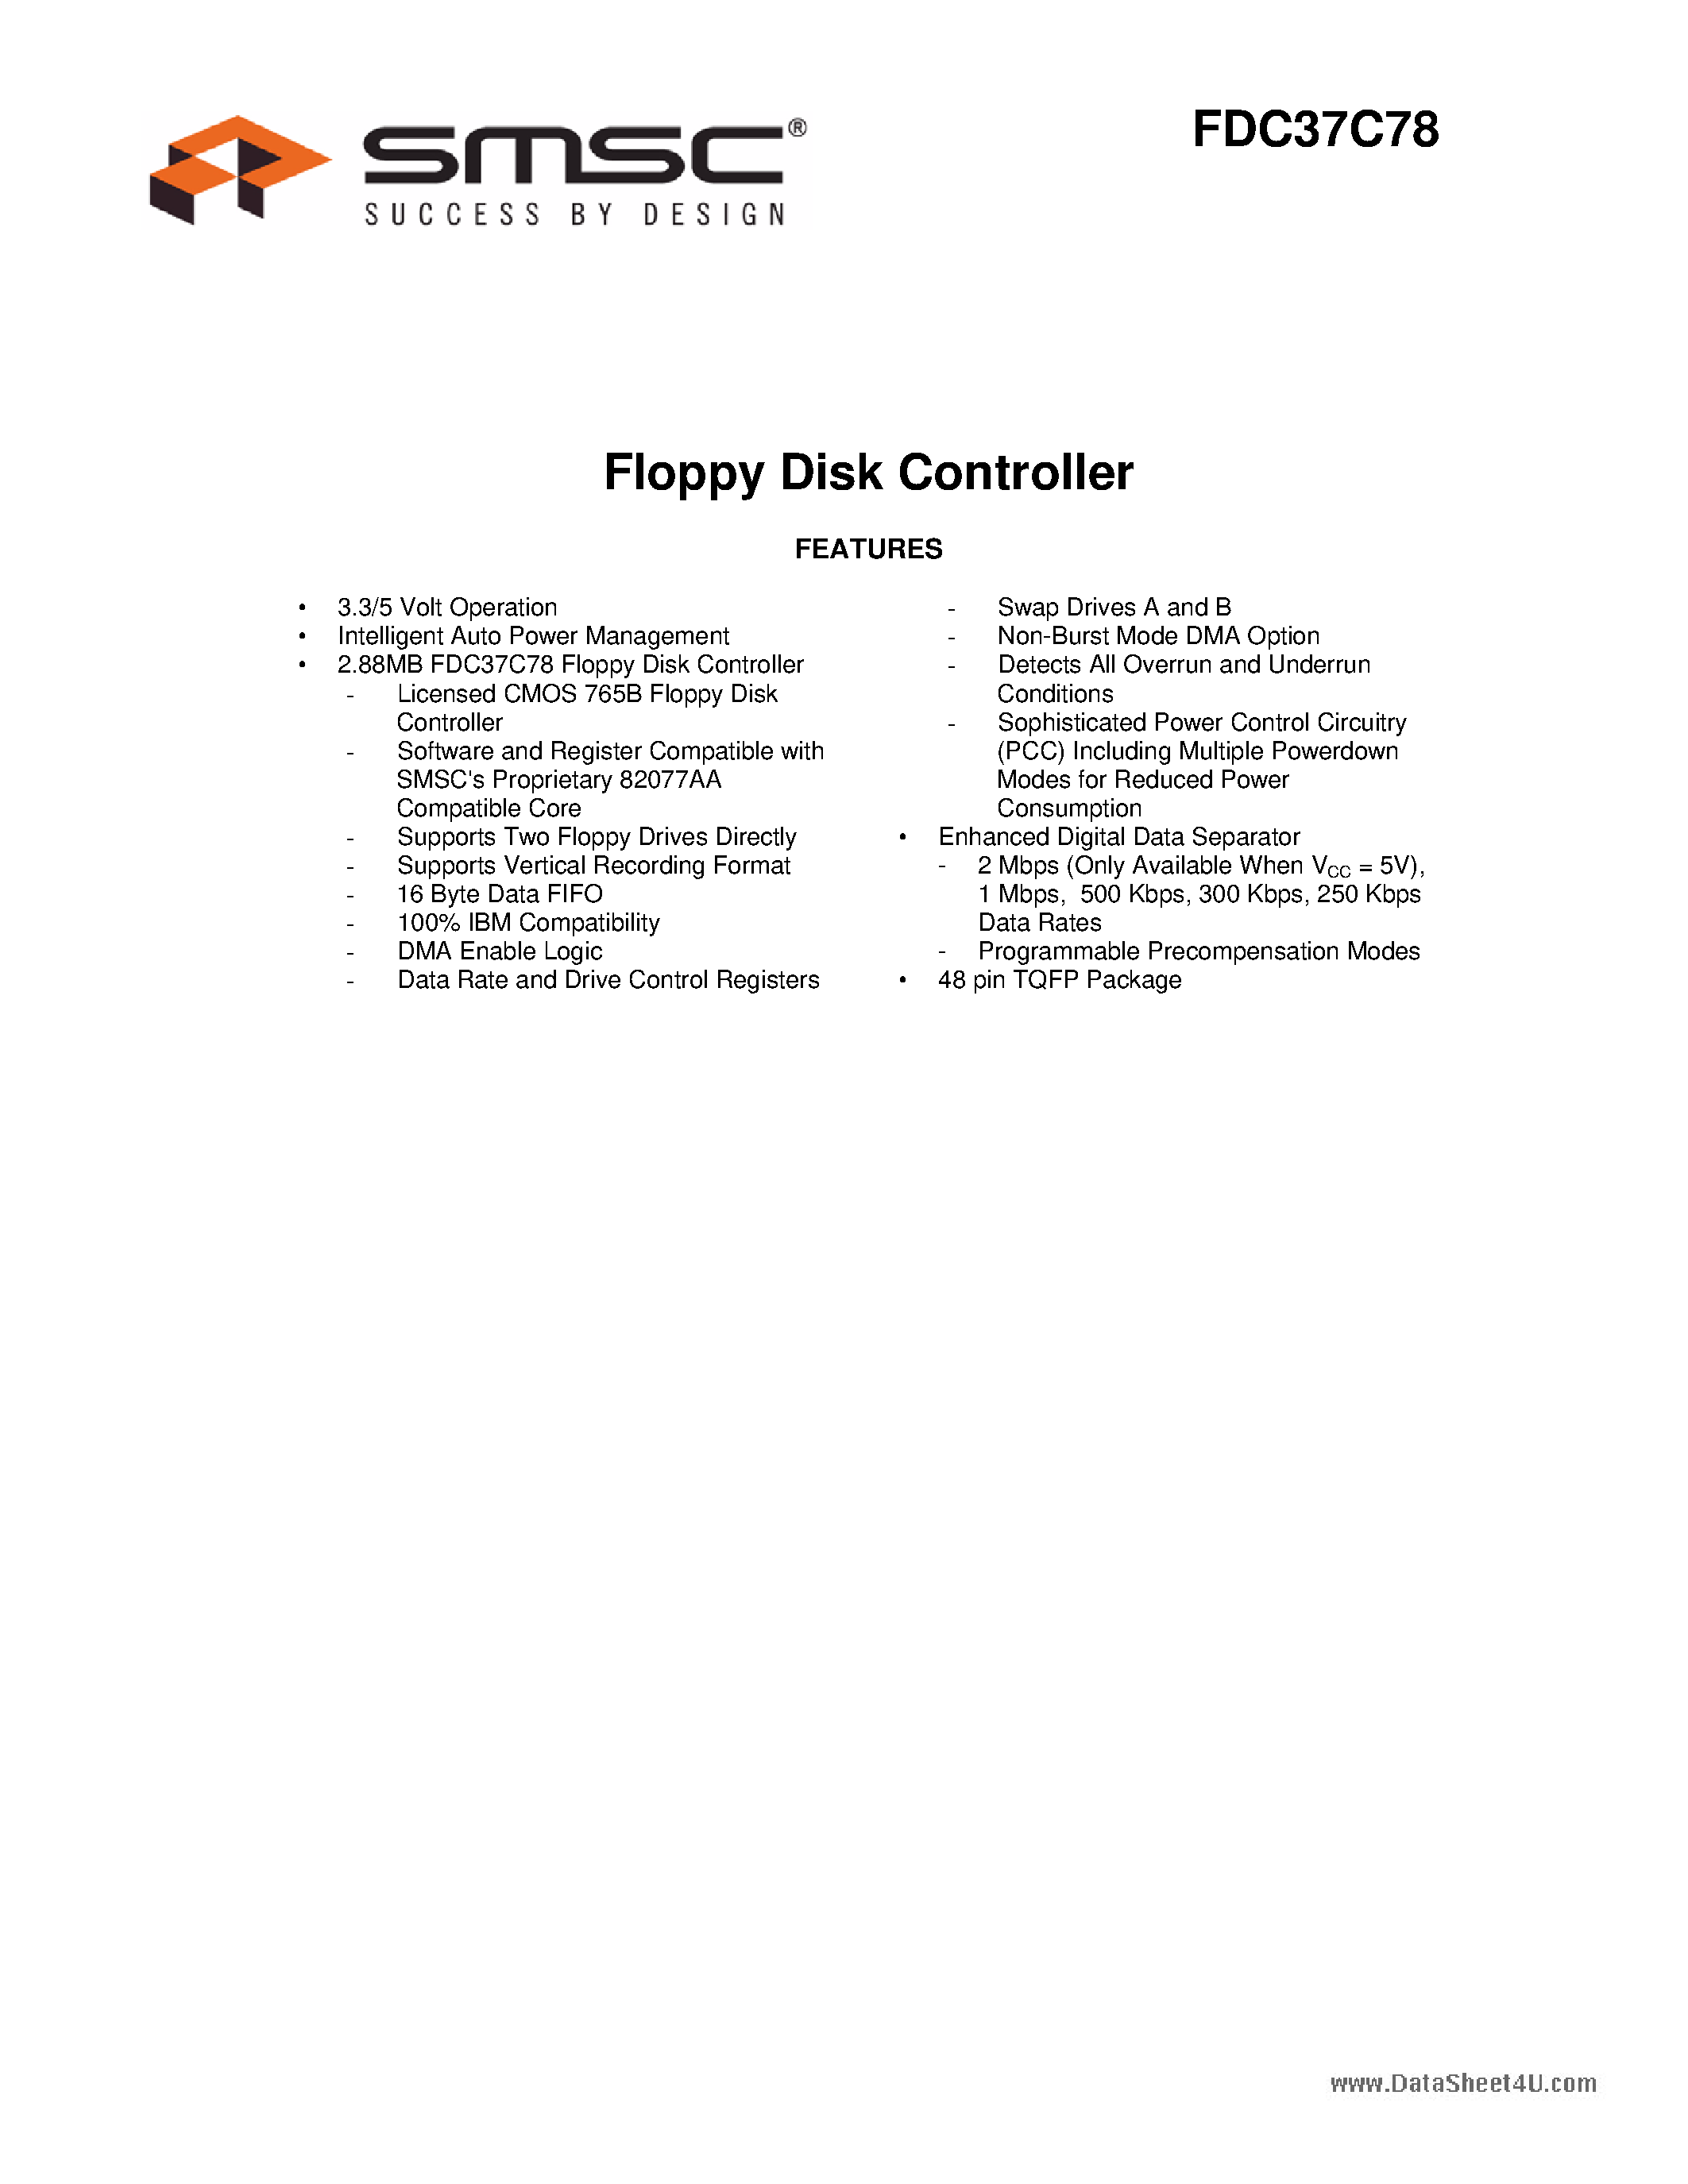 Datasheet FDC37C78 - Floppy Disk Controller page 1